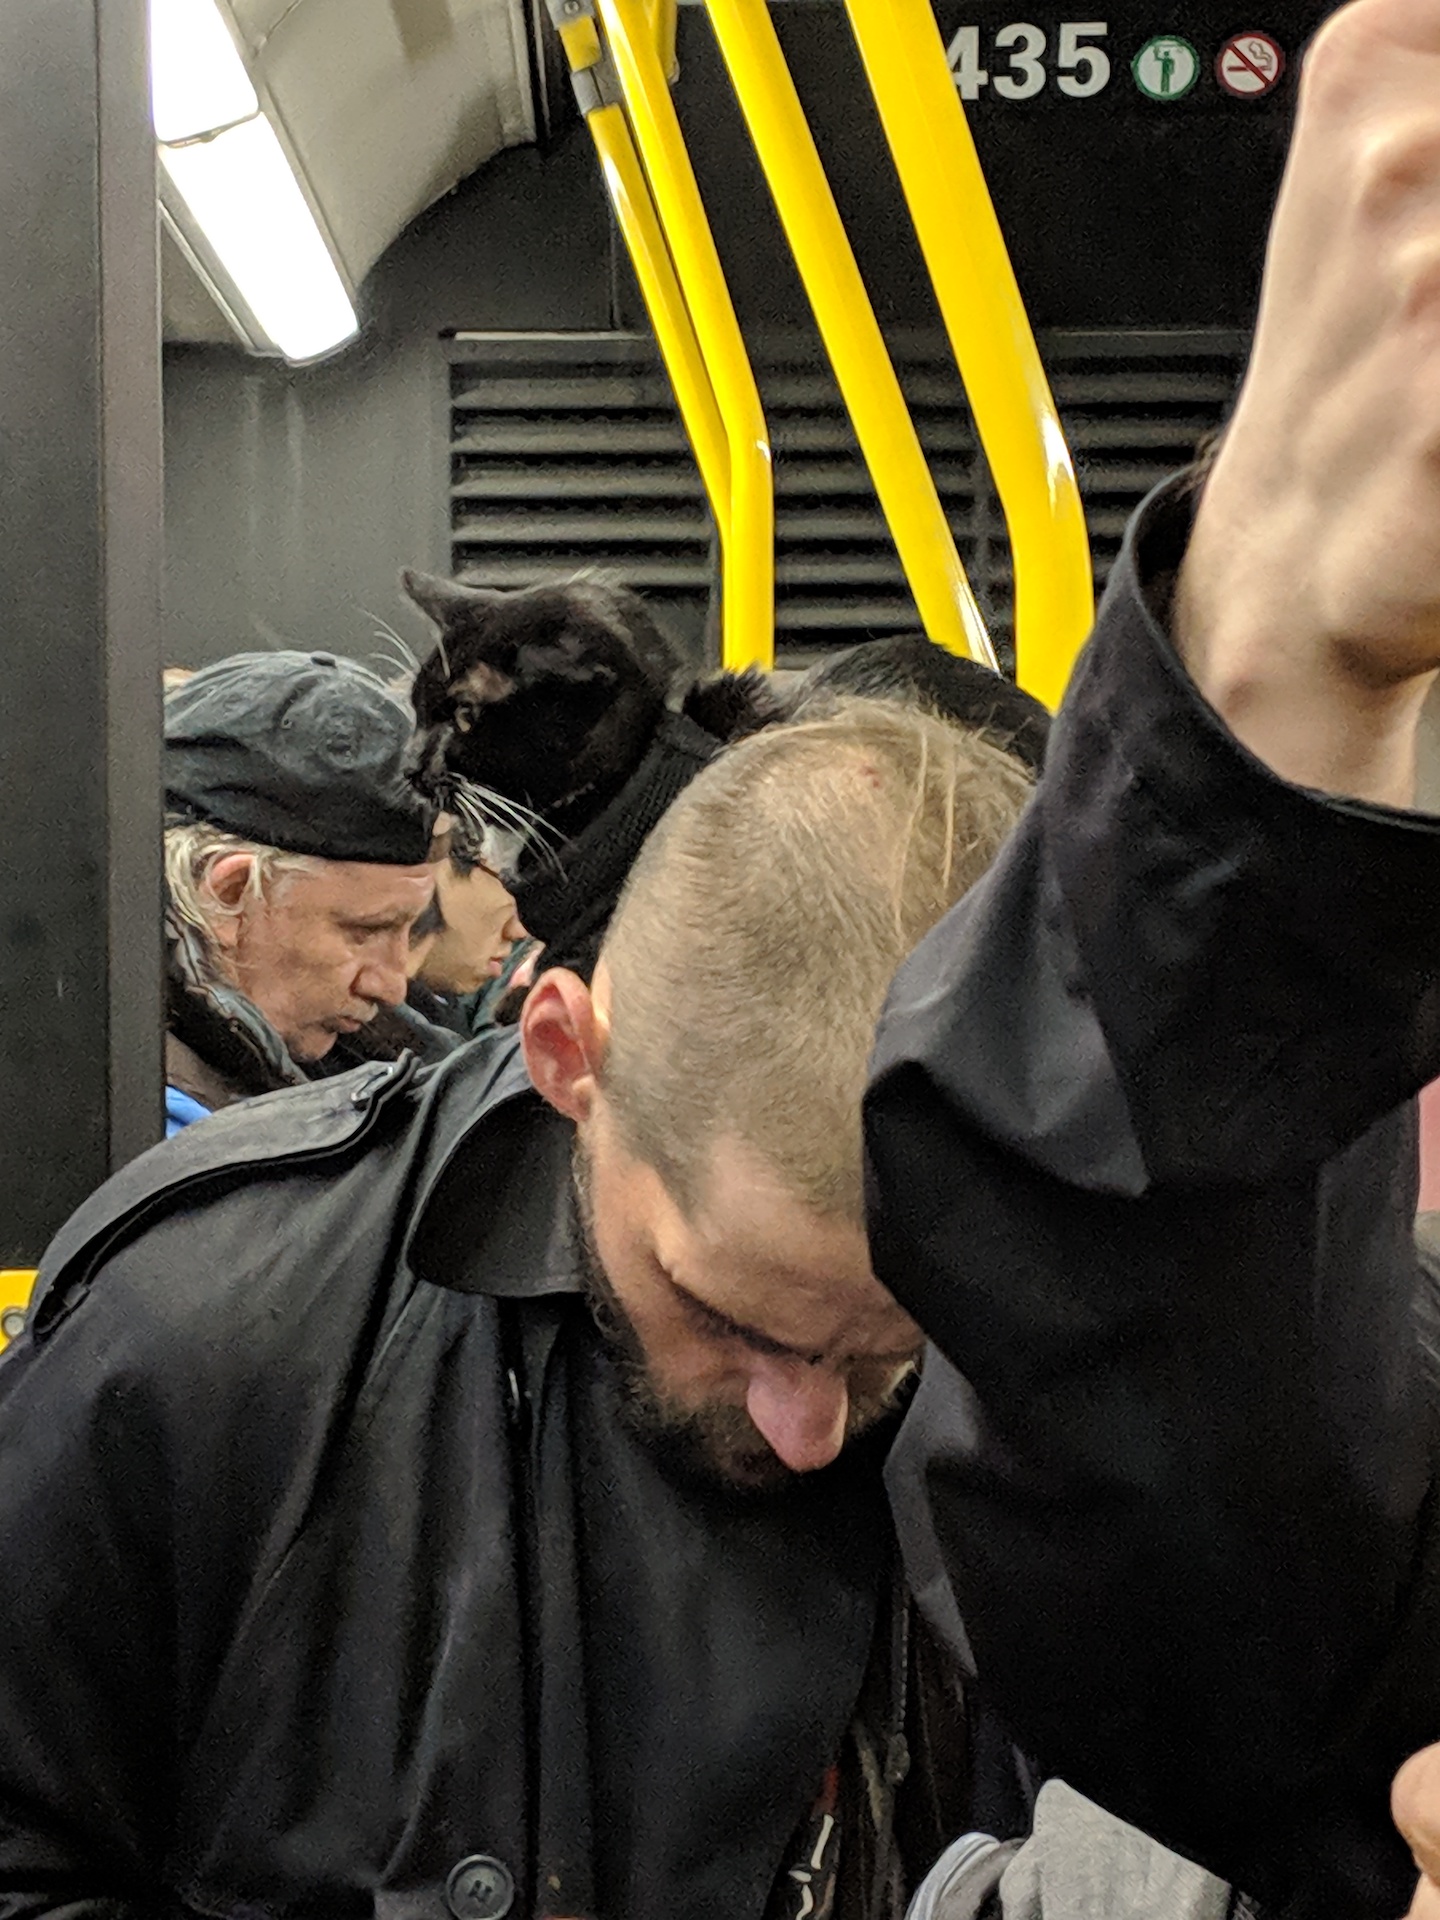 A man on the SF Muni with a cat on his back